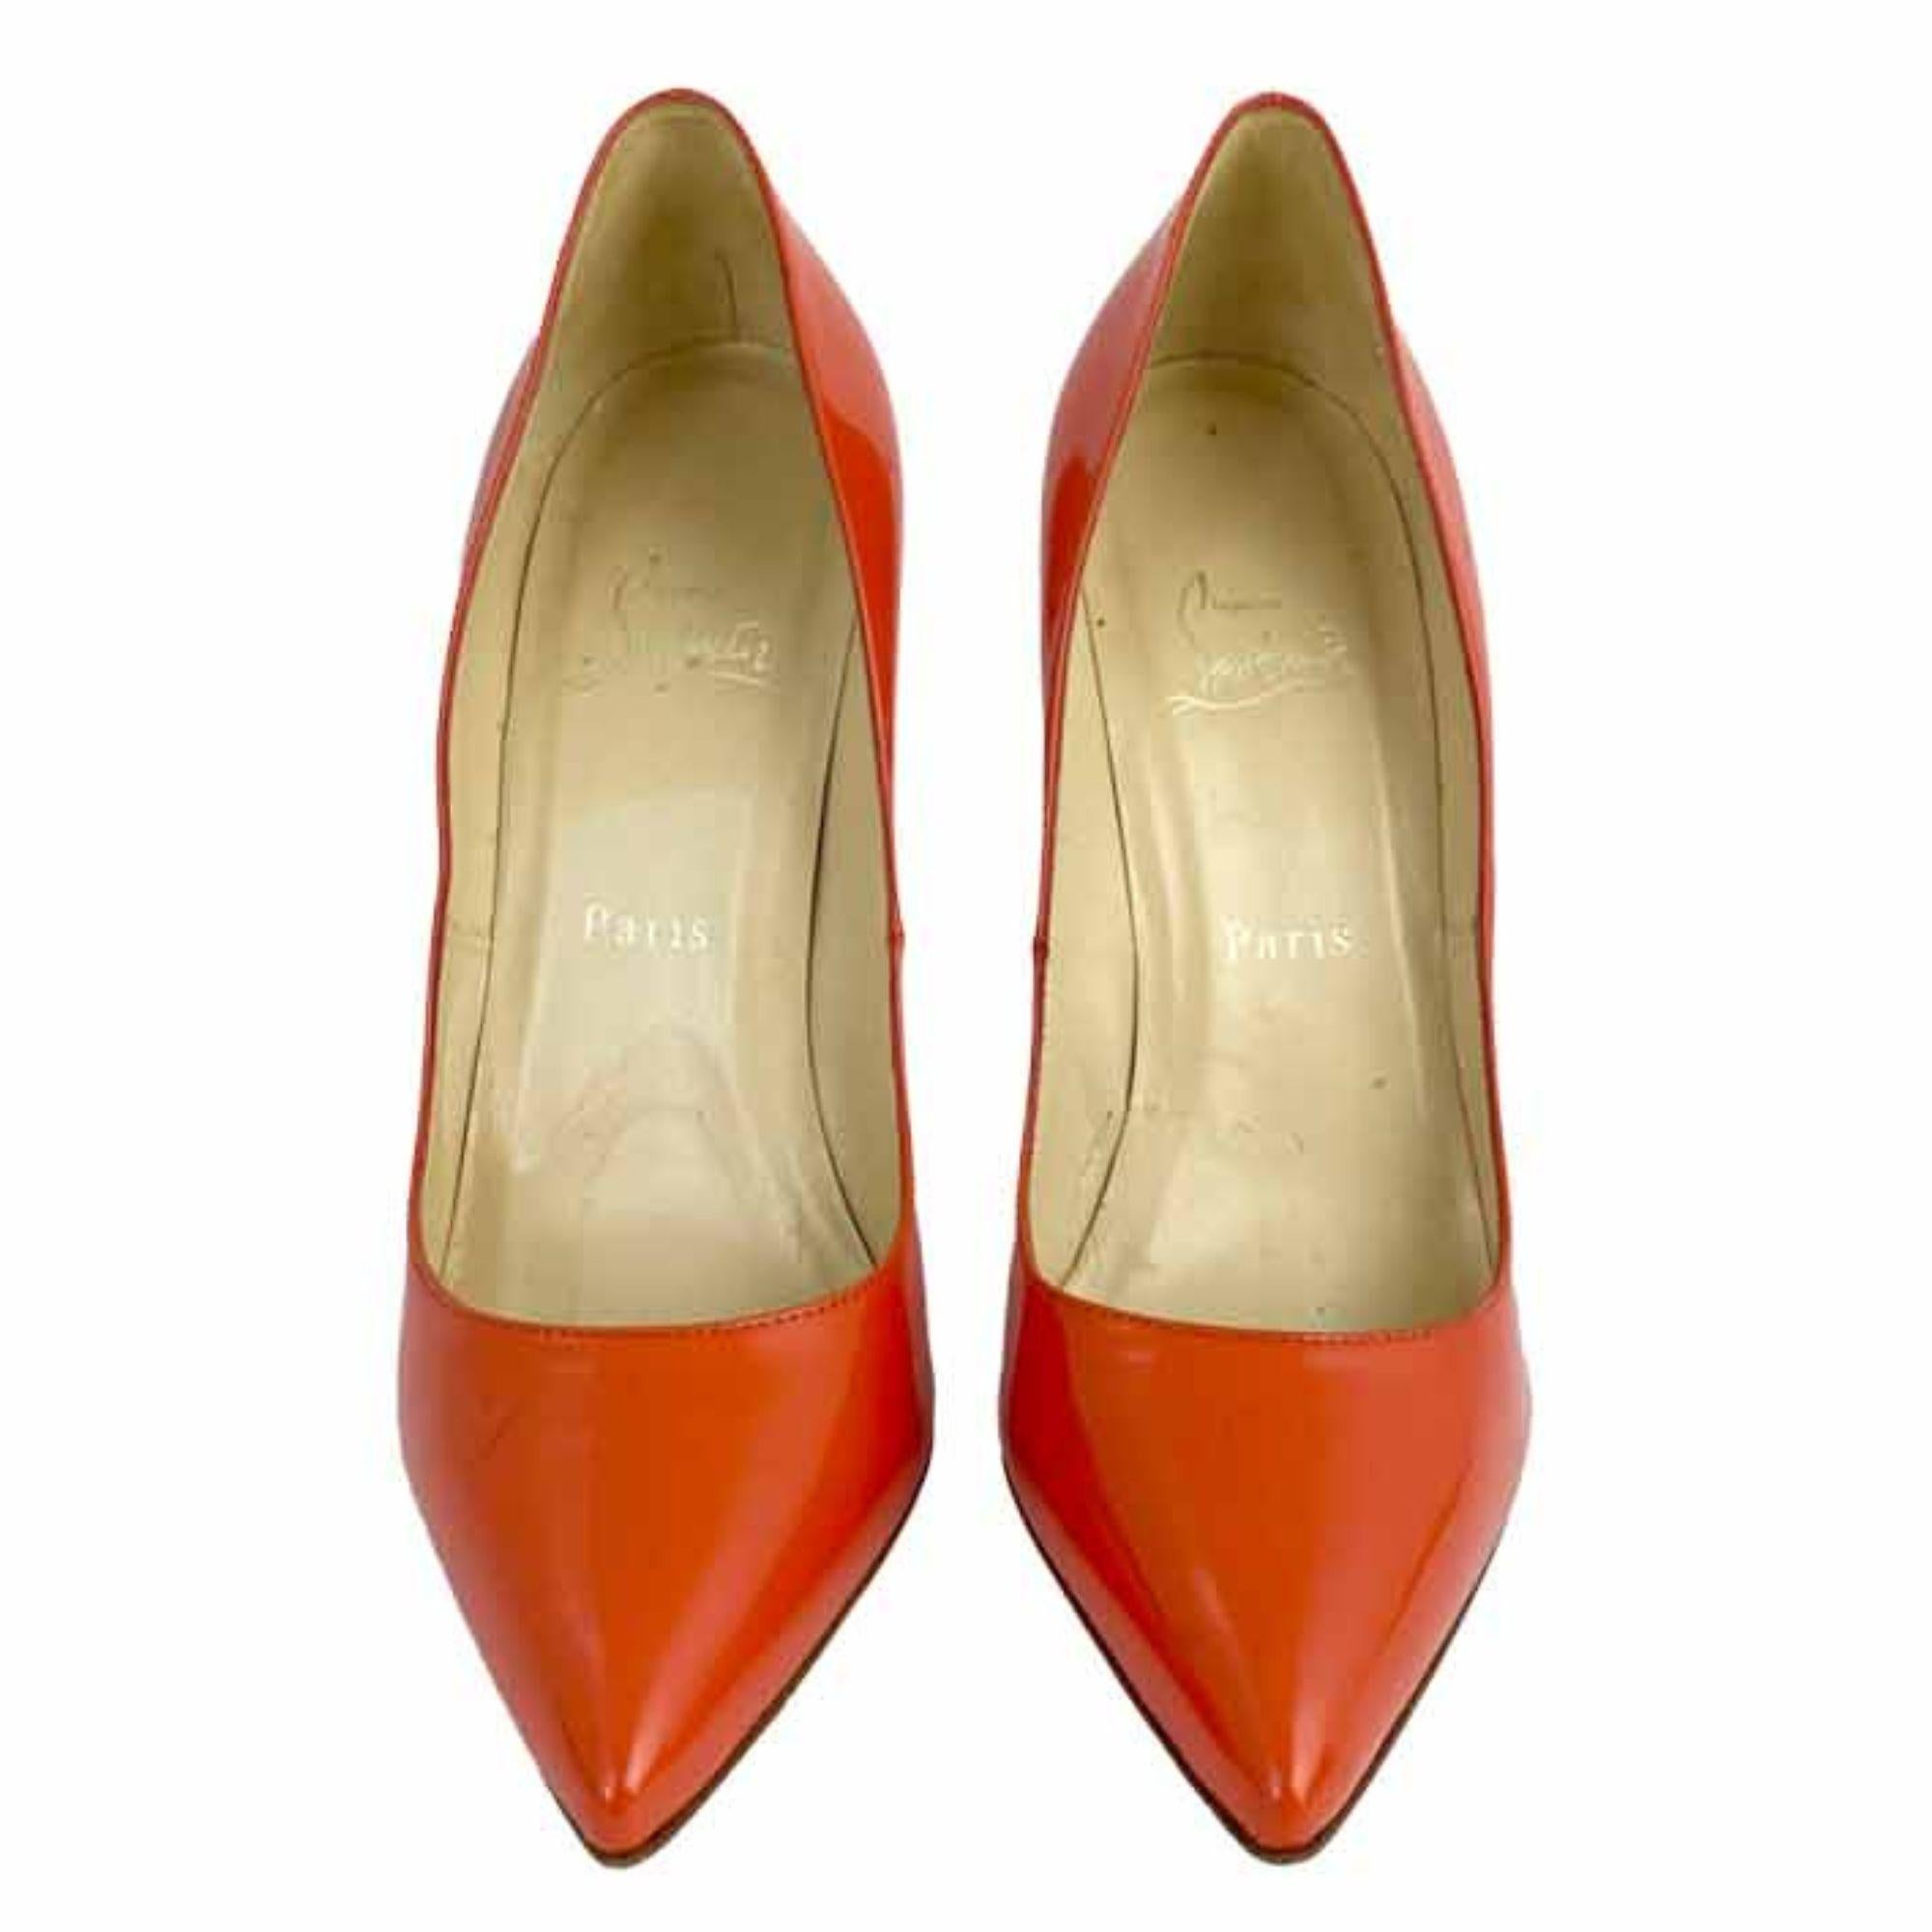 Christian Louboutin orange patent leather 'So Kate' Pumps. Pointed with stiletto heel.

Size: EU 37.5
Heel Height: 13cm 
Overall Condition: Good
Interior Condition: Signs of use
Exterior Condition: Some scratches on the leather and stains.